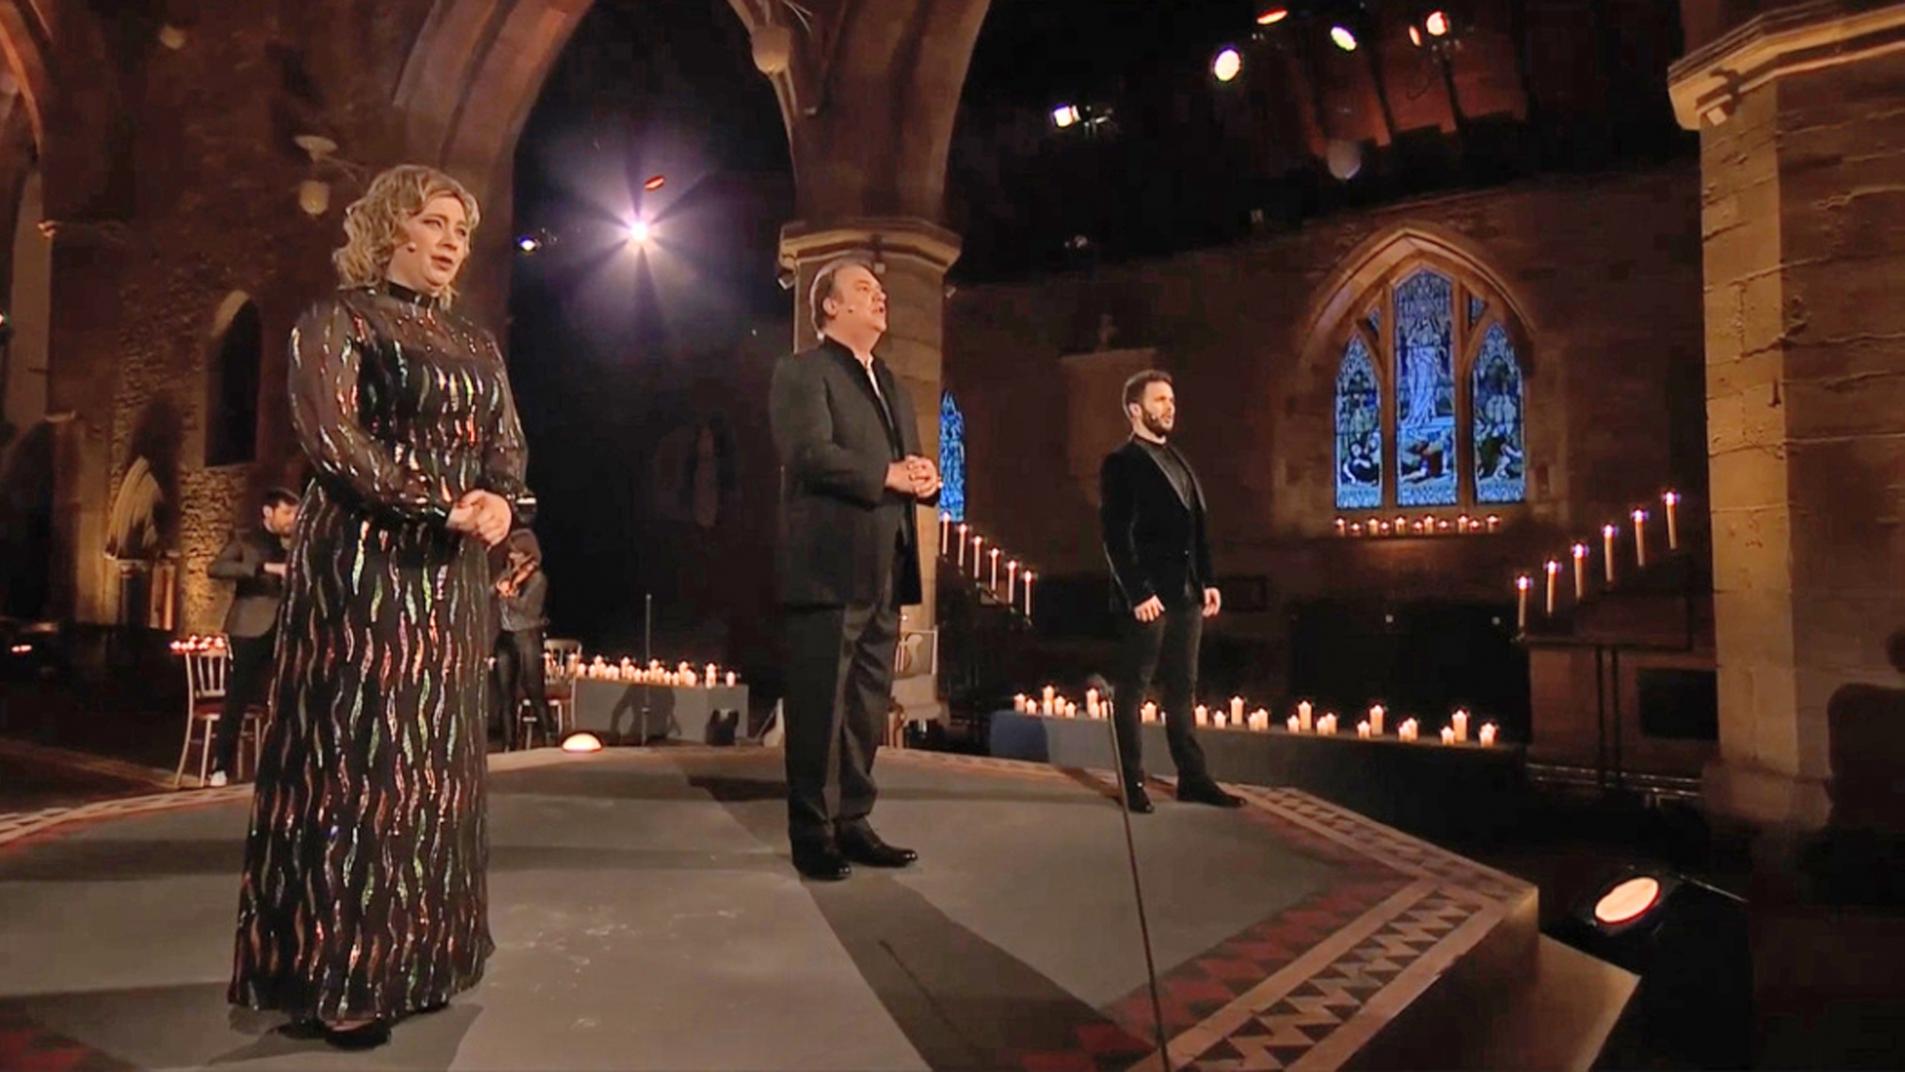 Sir Bryn Terfel concert at Brecon Cathedral copyright The Metropolitan Opera